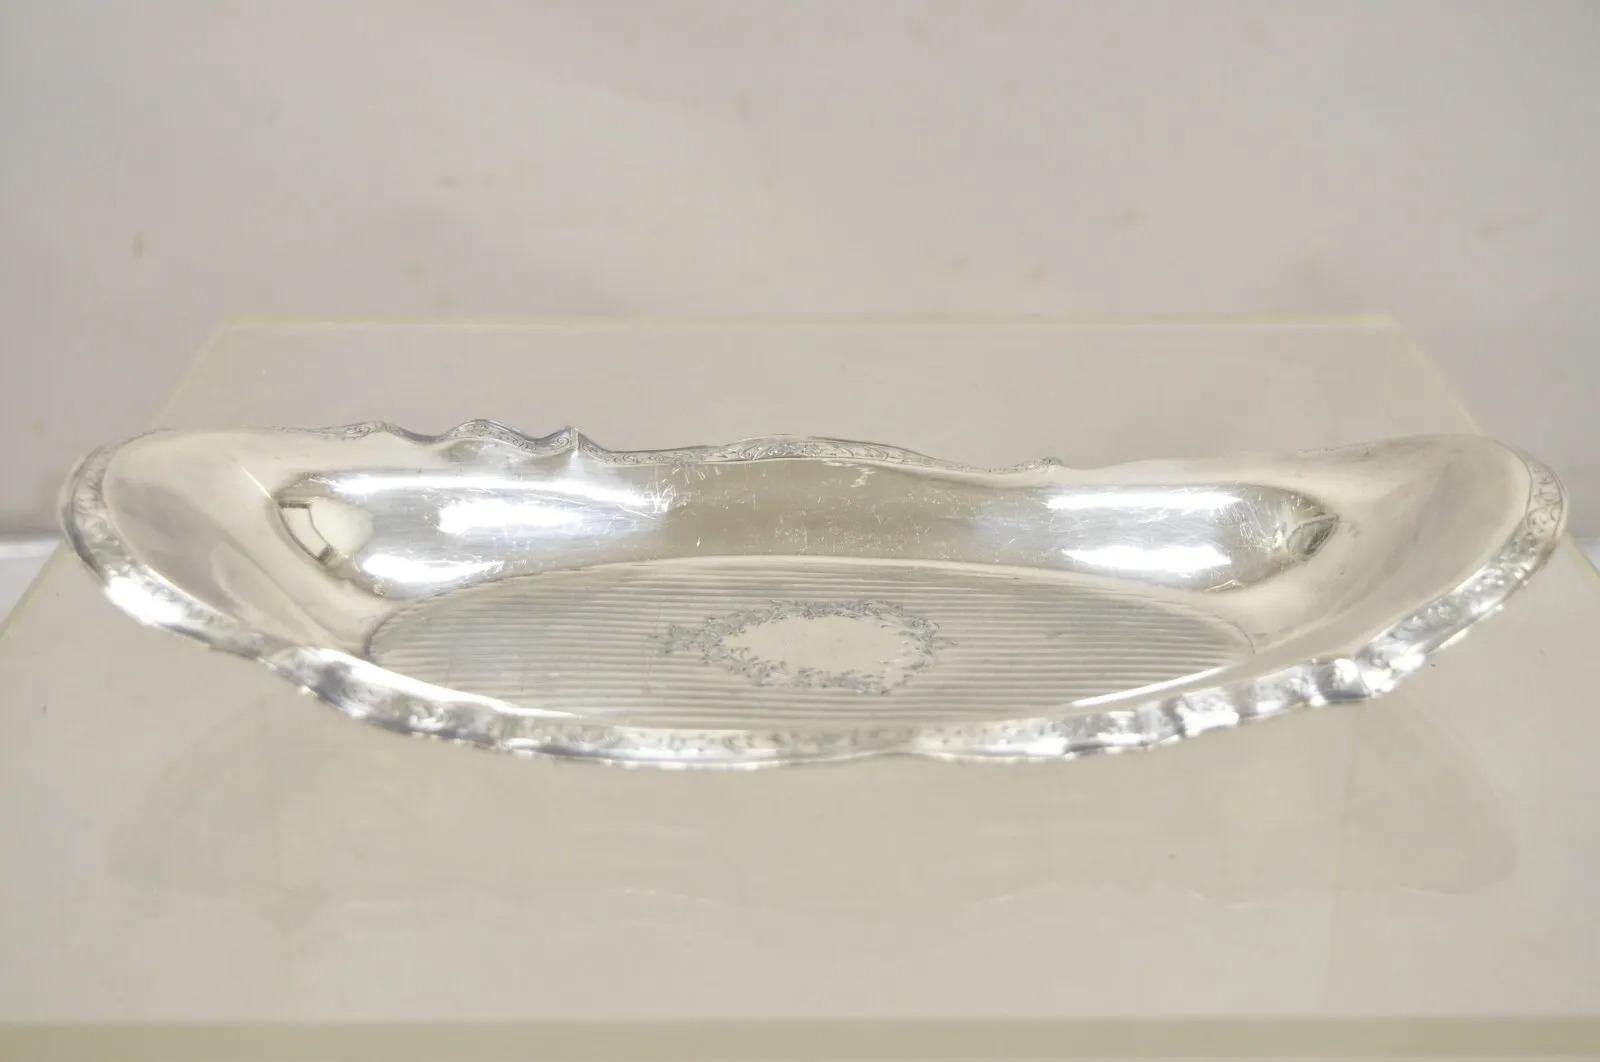 Vintage Art Nouveau Silver Plated Oval Trinket Dish Candy Dish Tray For Sale 4